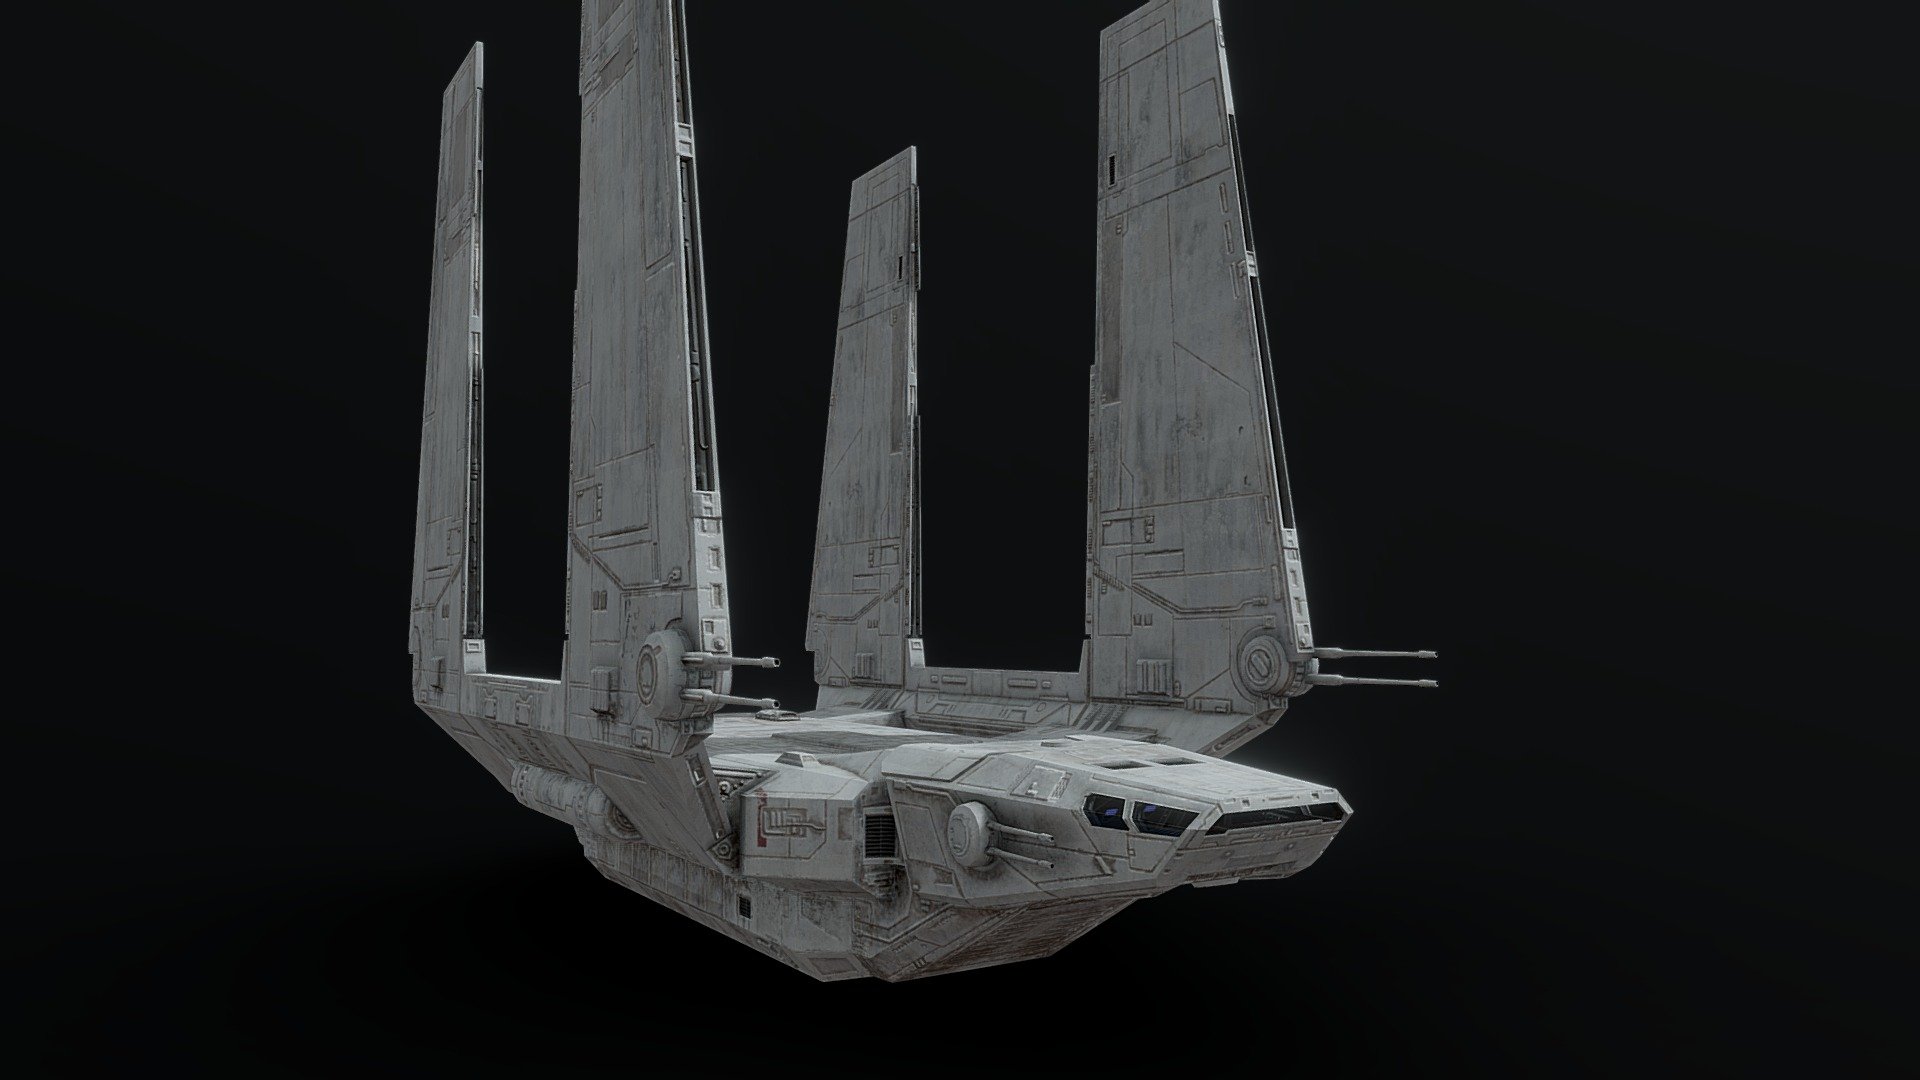 A low poly Zeta-class shuttle, as seen in Rogue One and Jedi: Fallen Order! My most detailed texture yet. This model is probably about 85% accurate, although I've gone for a more standard imperial gray to match the Lambda shuttle, rather than the black and orange we first saw in Rogue One. Fits in really well with the rest of the Empire's fleet.

The wings and laser cannon turrets are all separate objects with the correct pivot points to rotate into flight mode. A few areas are very slightly simplified to keep the polycount low, and everything uses the same 2048x2048 textures. It also has a rough cockpit interior just with some glowing lights to add a bit of depth, but if you want to save performance you can delete it and make the windows opaque. Enjoy! As with my other ships, it is modeled to the correct accurate scale 3d model